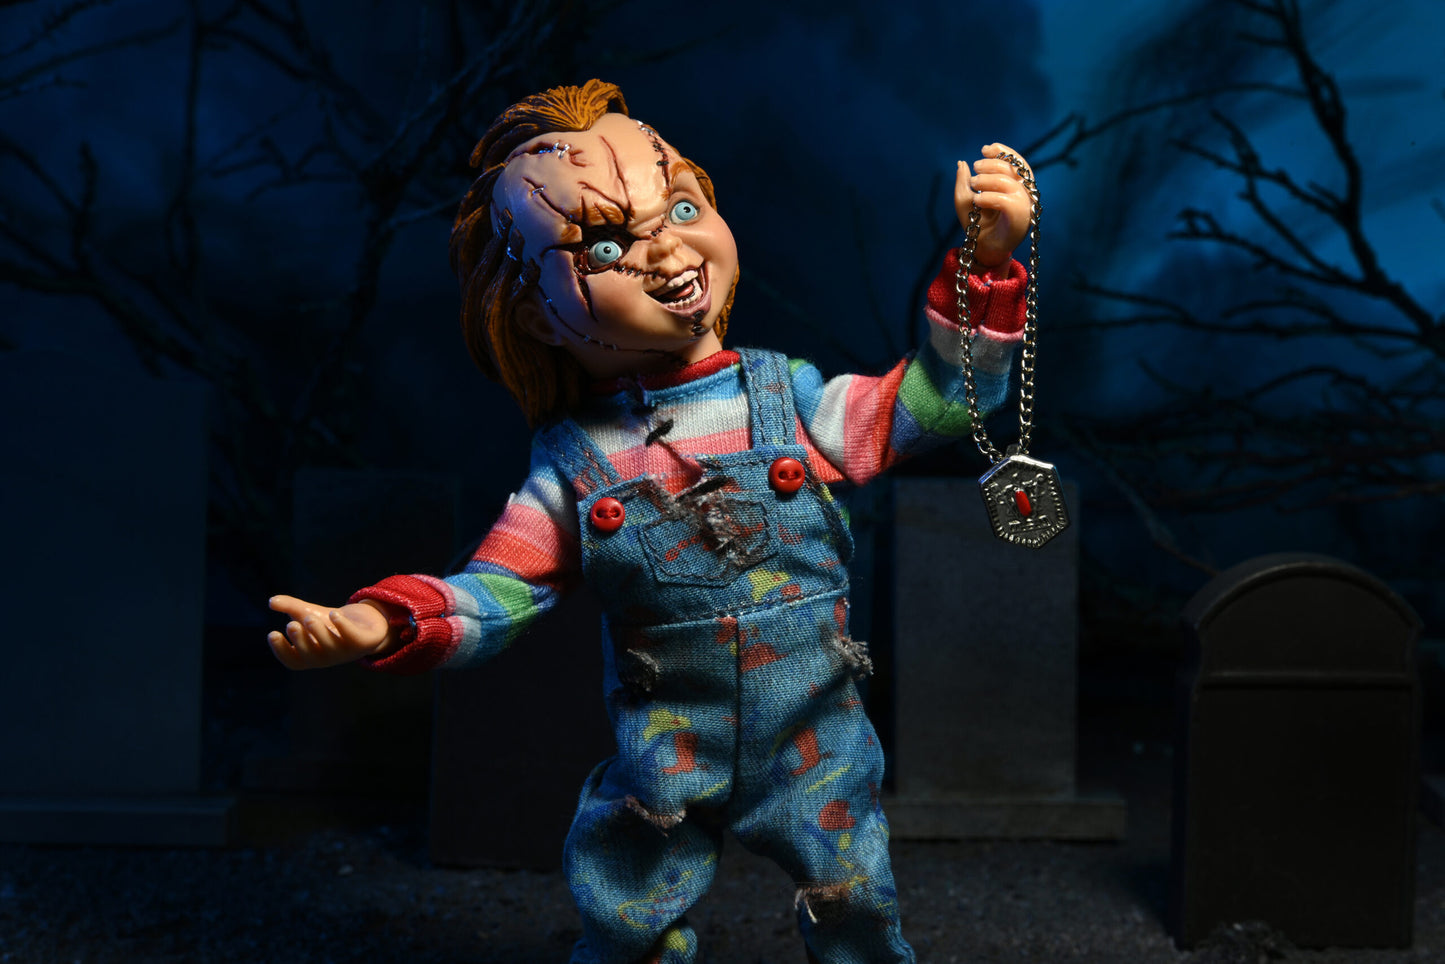 NECA - 8″ Scale Clothed Figure – Chucky & Tiffany 2-Pack